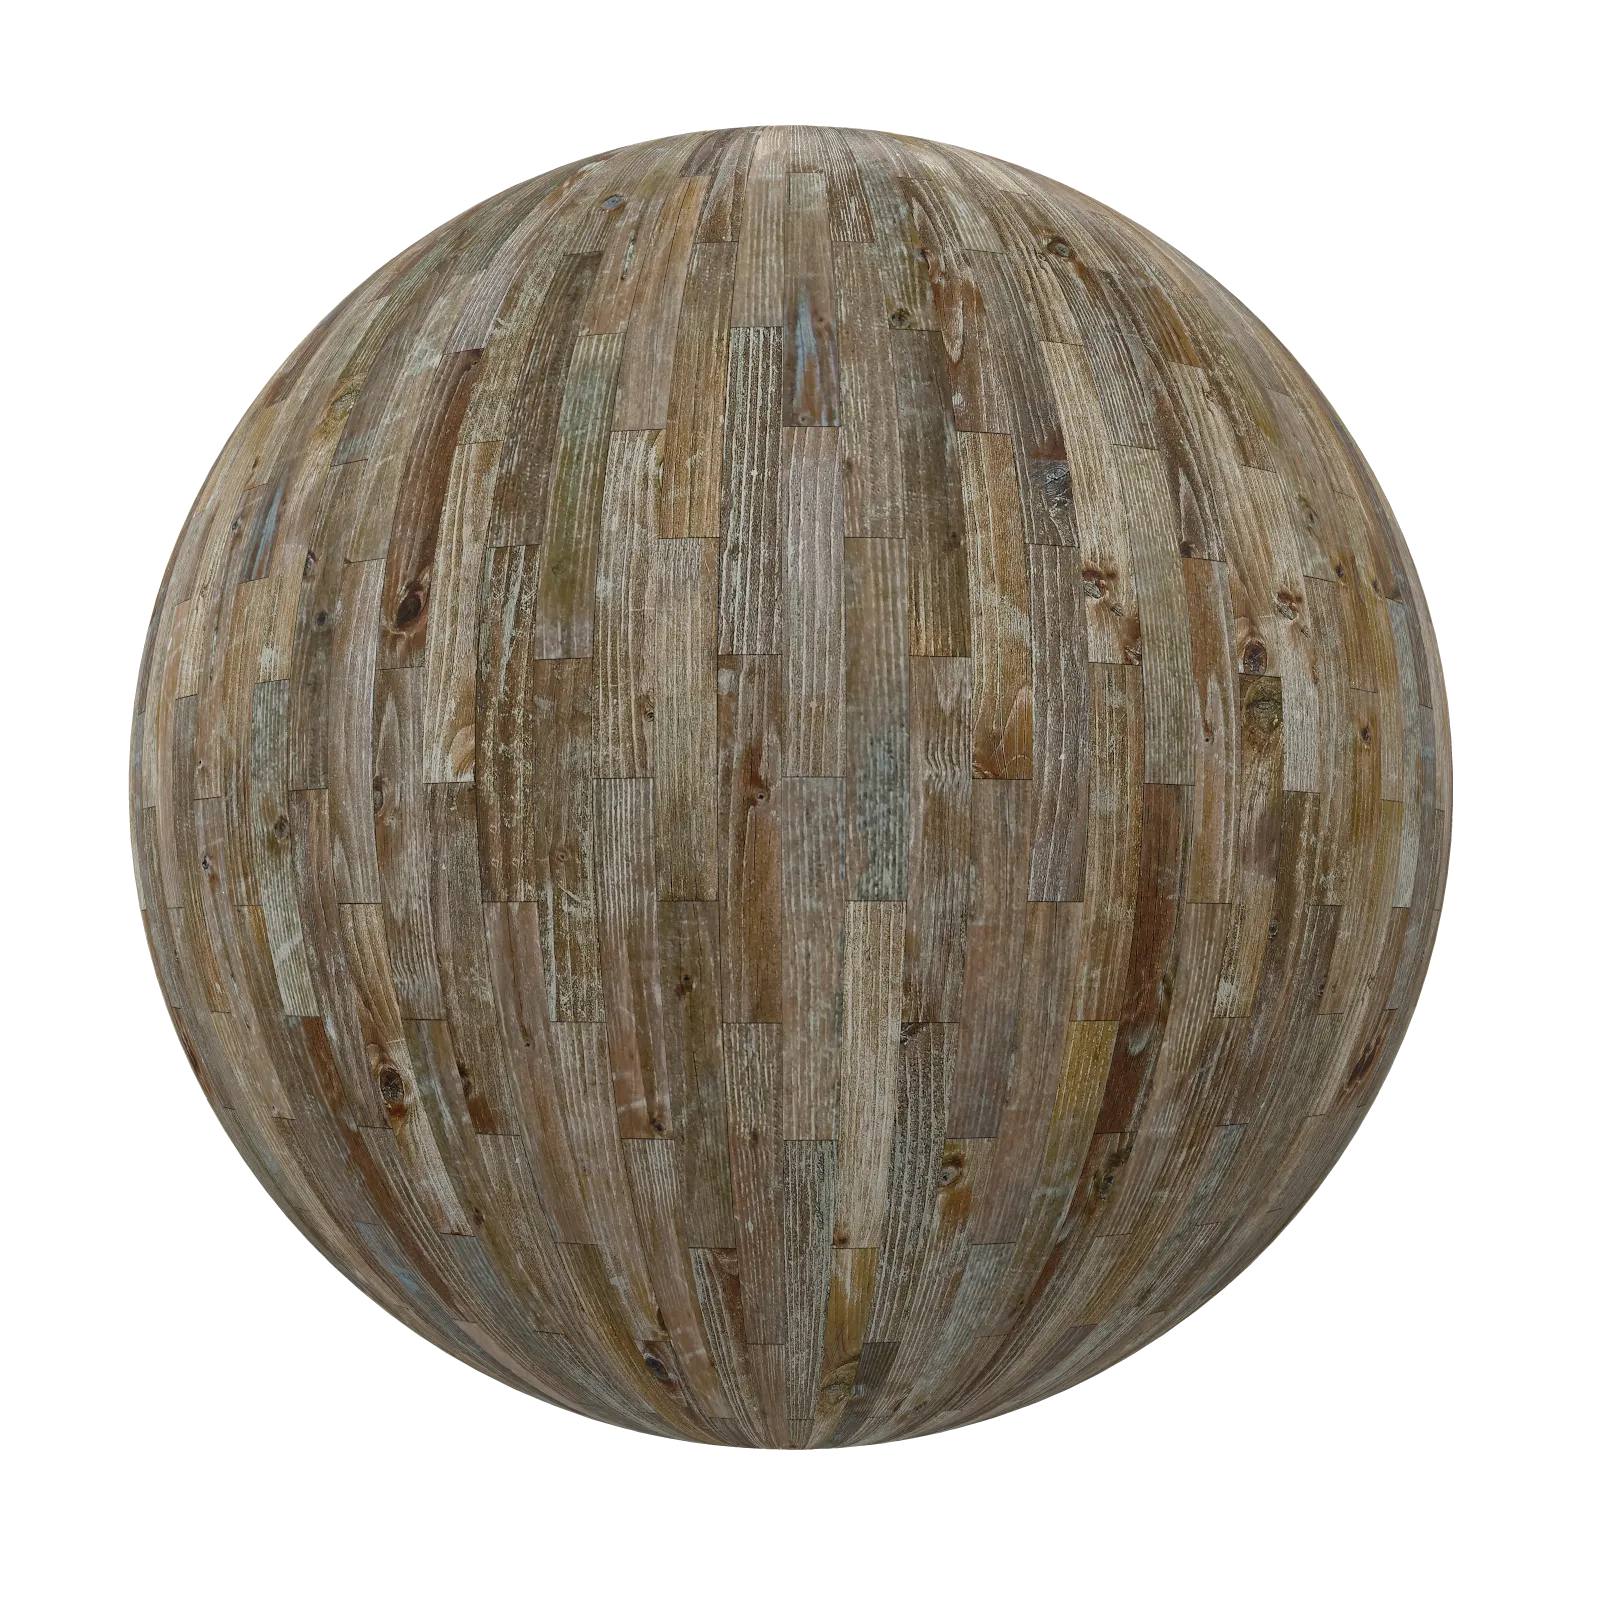 TEXTURES – WOOD – Old Wood Tiles 7